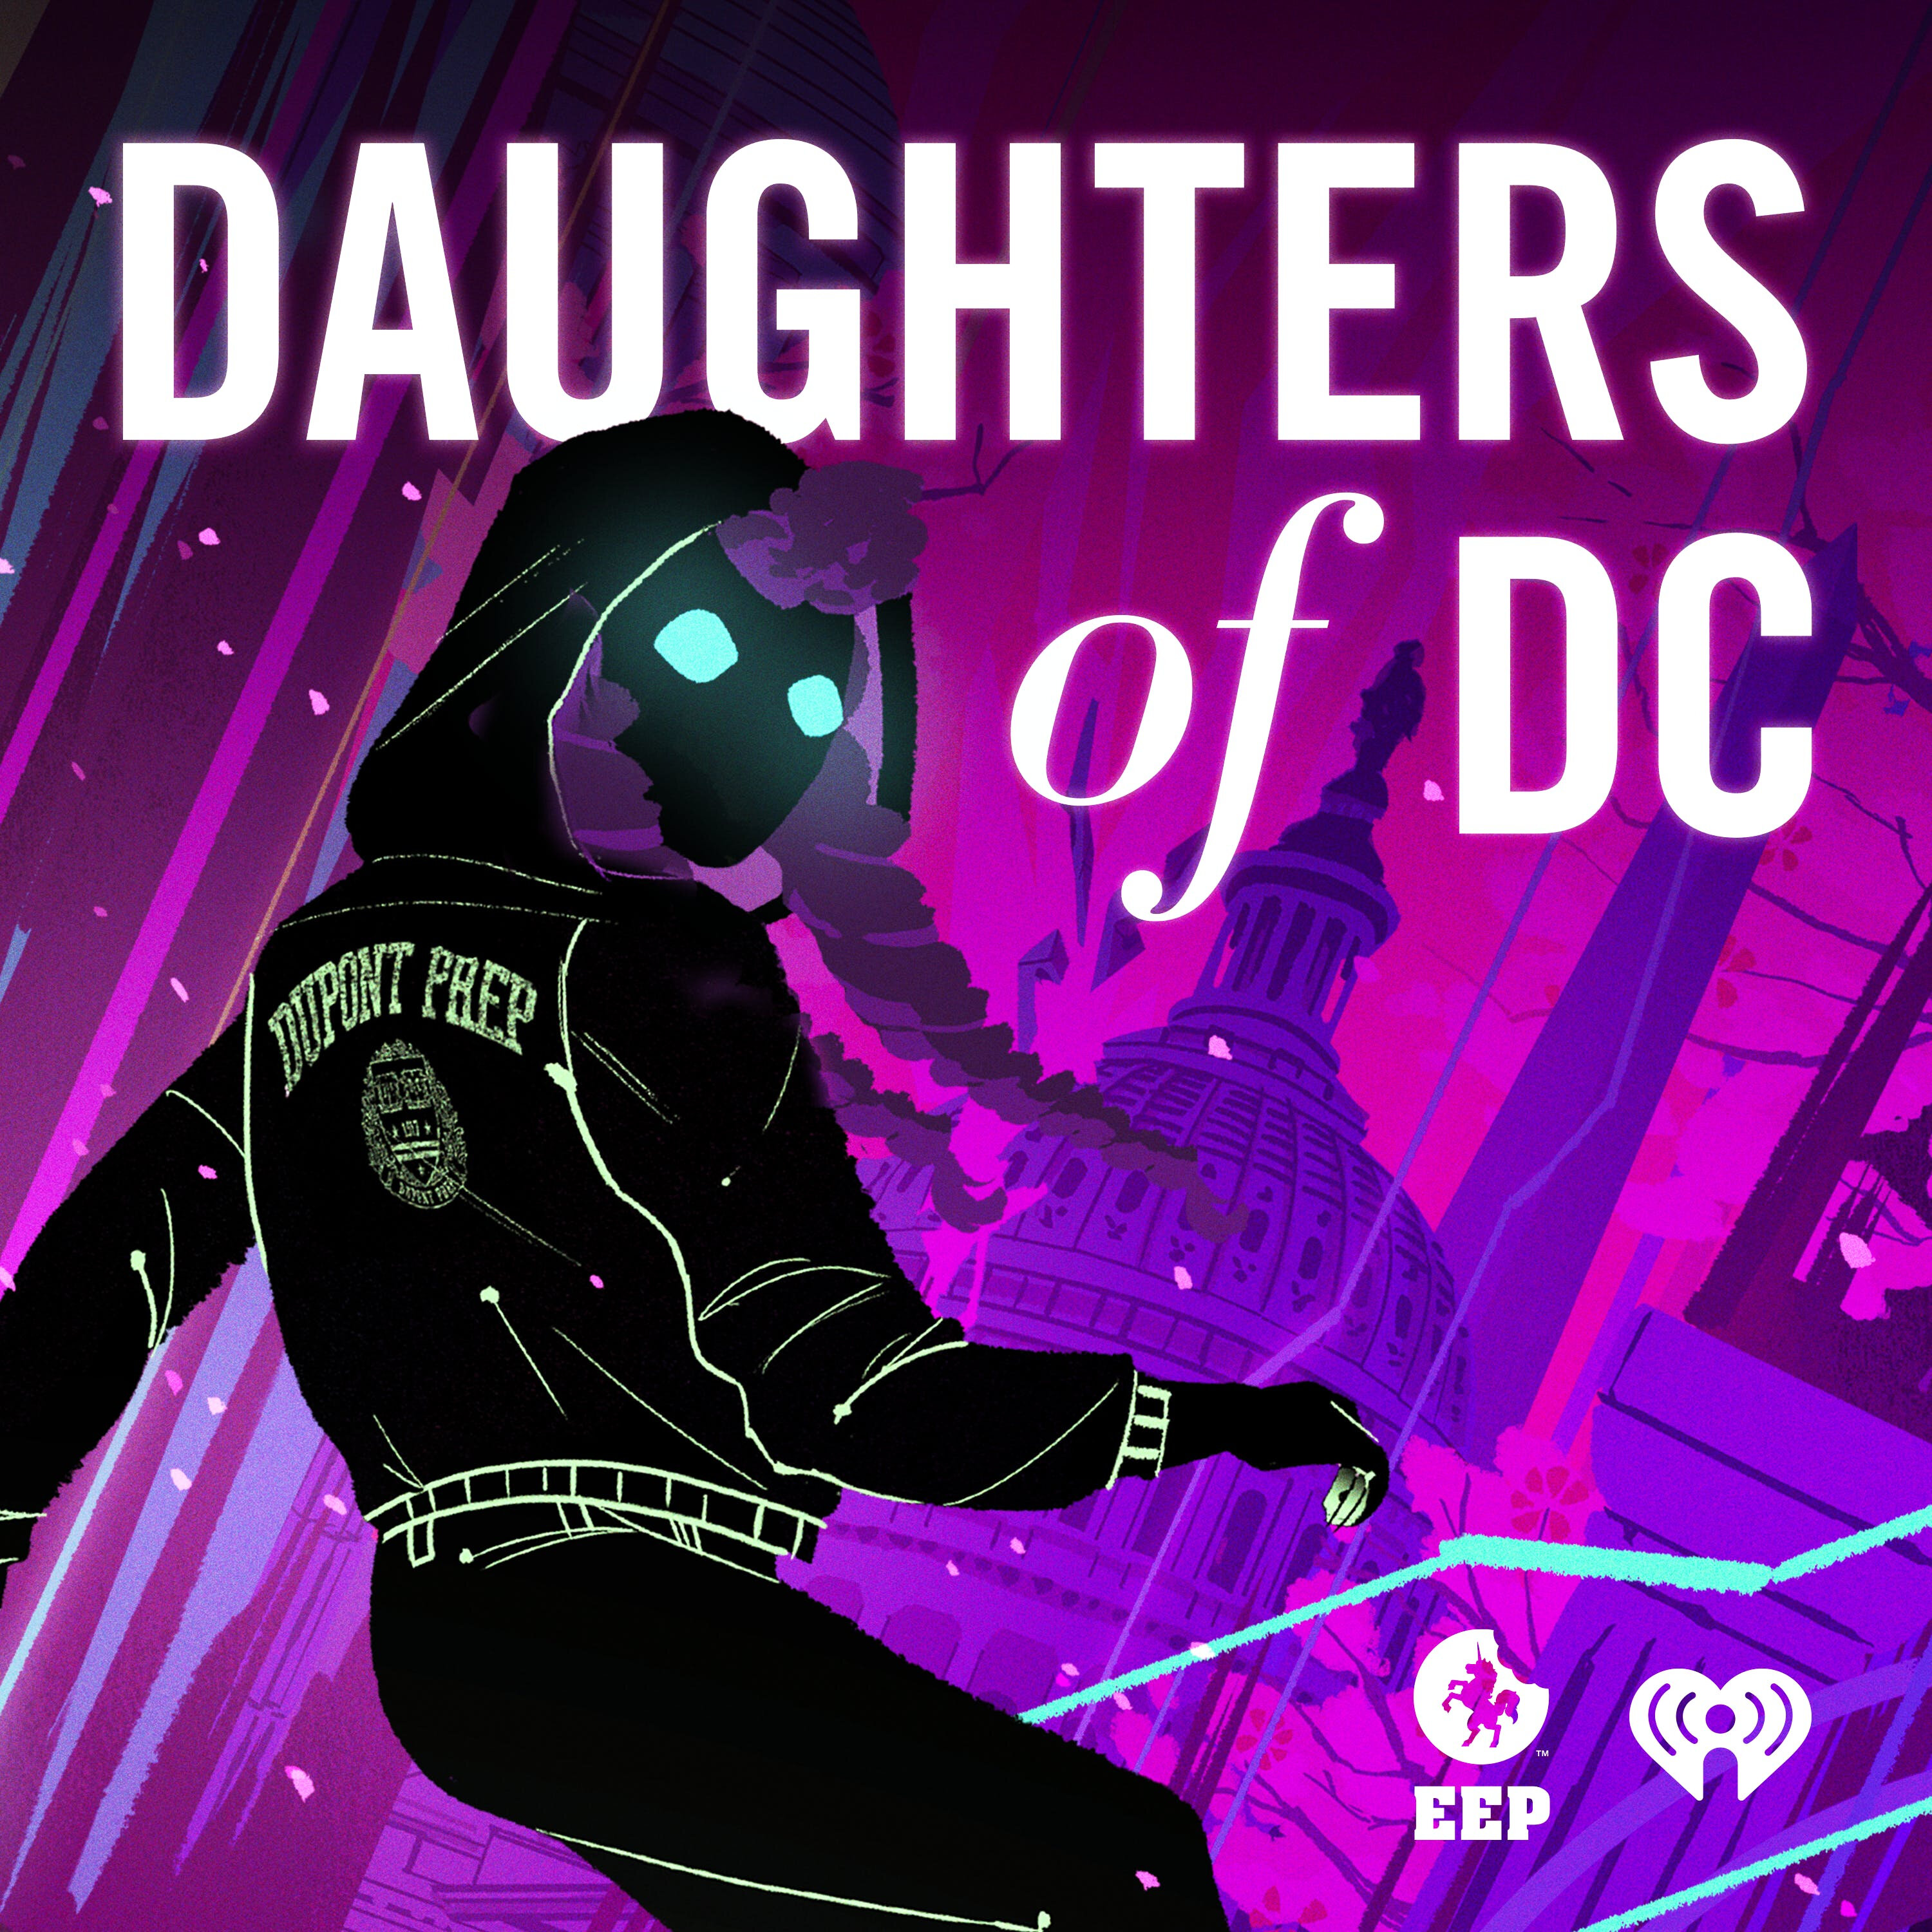 Introducing Daughters of DC, a Brand New Scripted Political Thriller